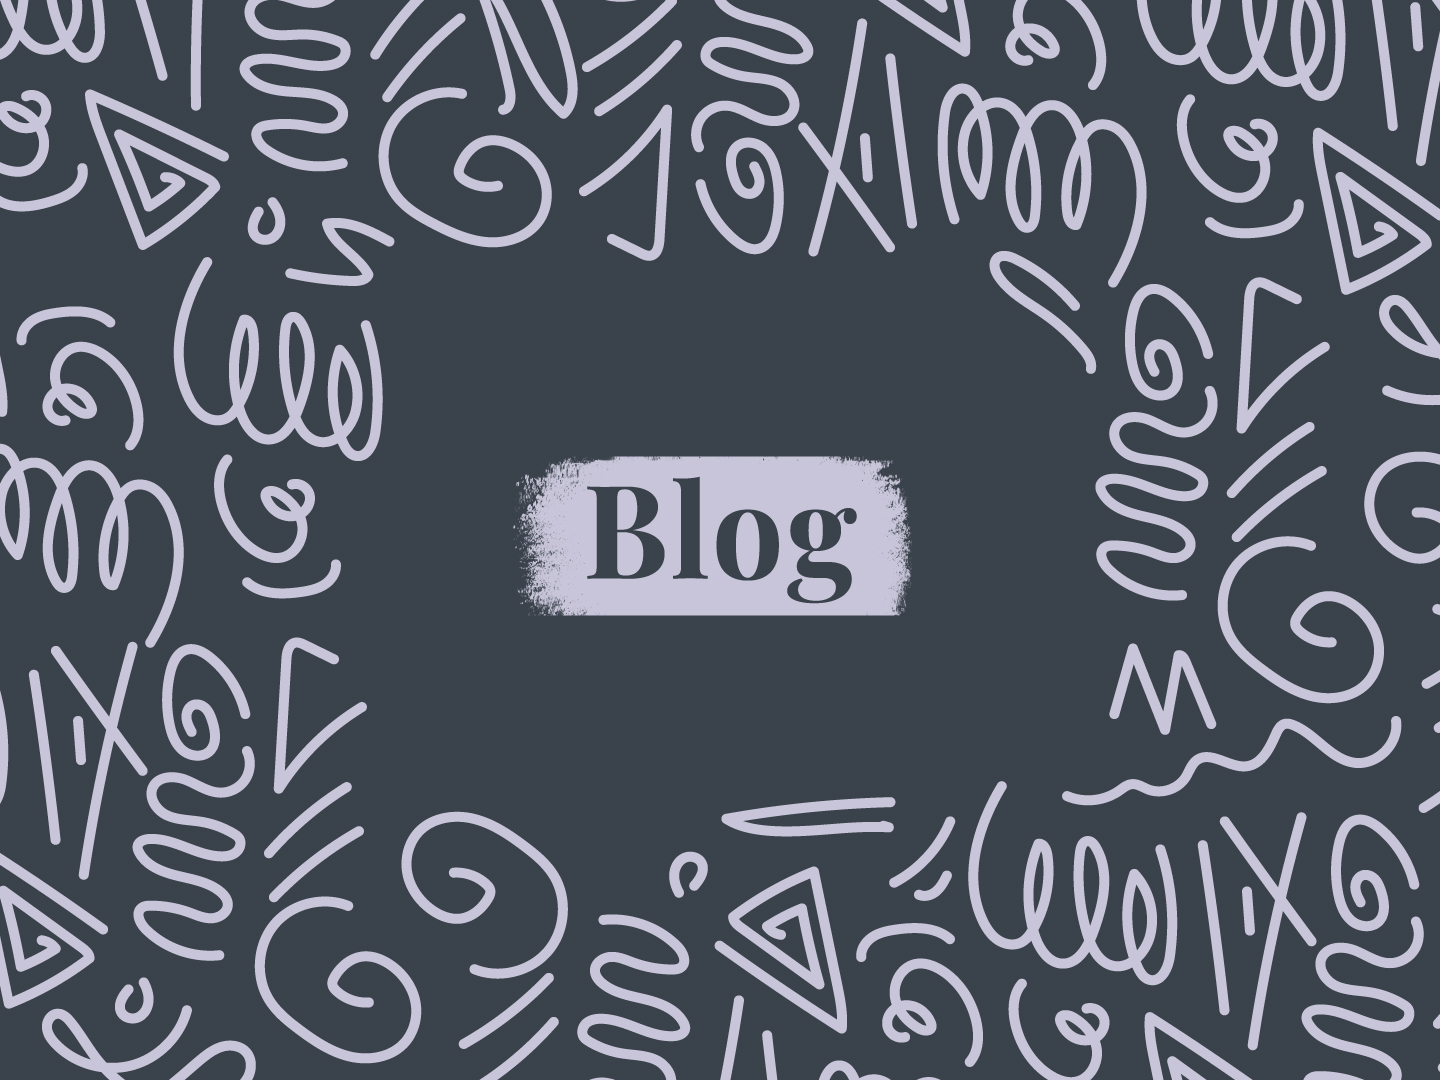 blog with a paint stroke behind and squiggly patterns drawn around it